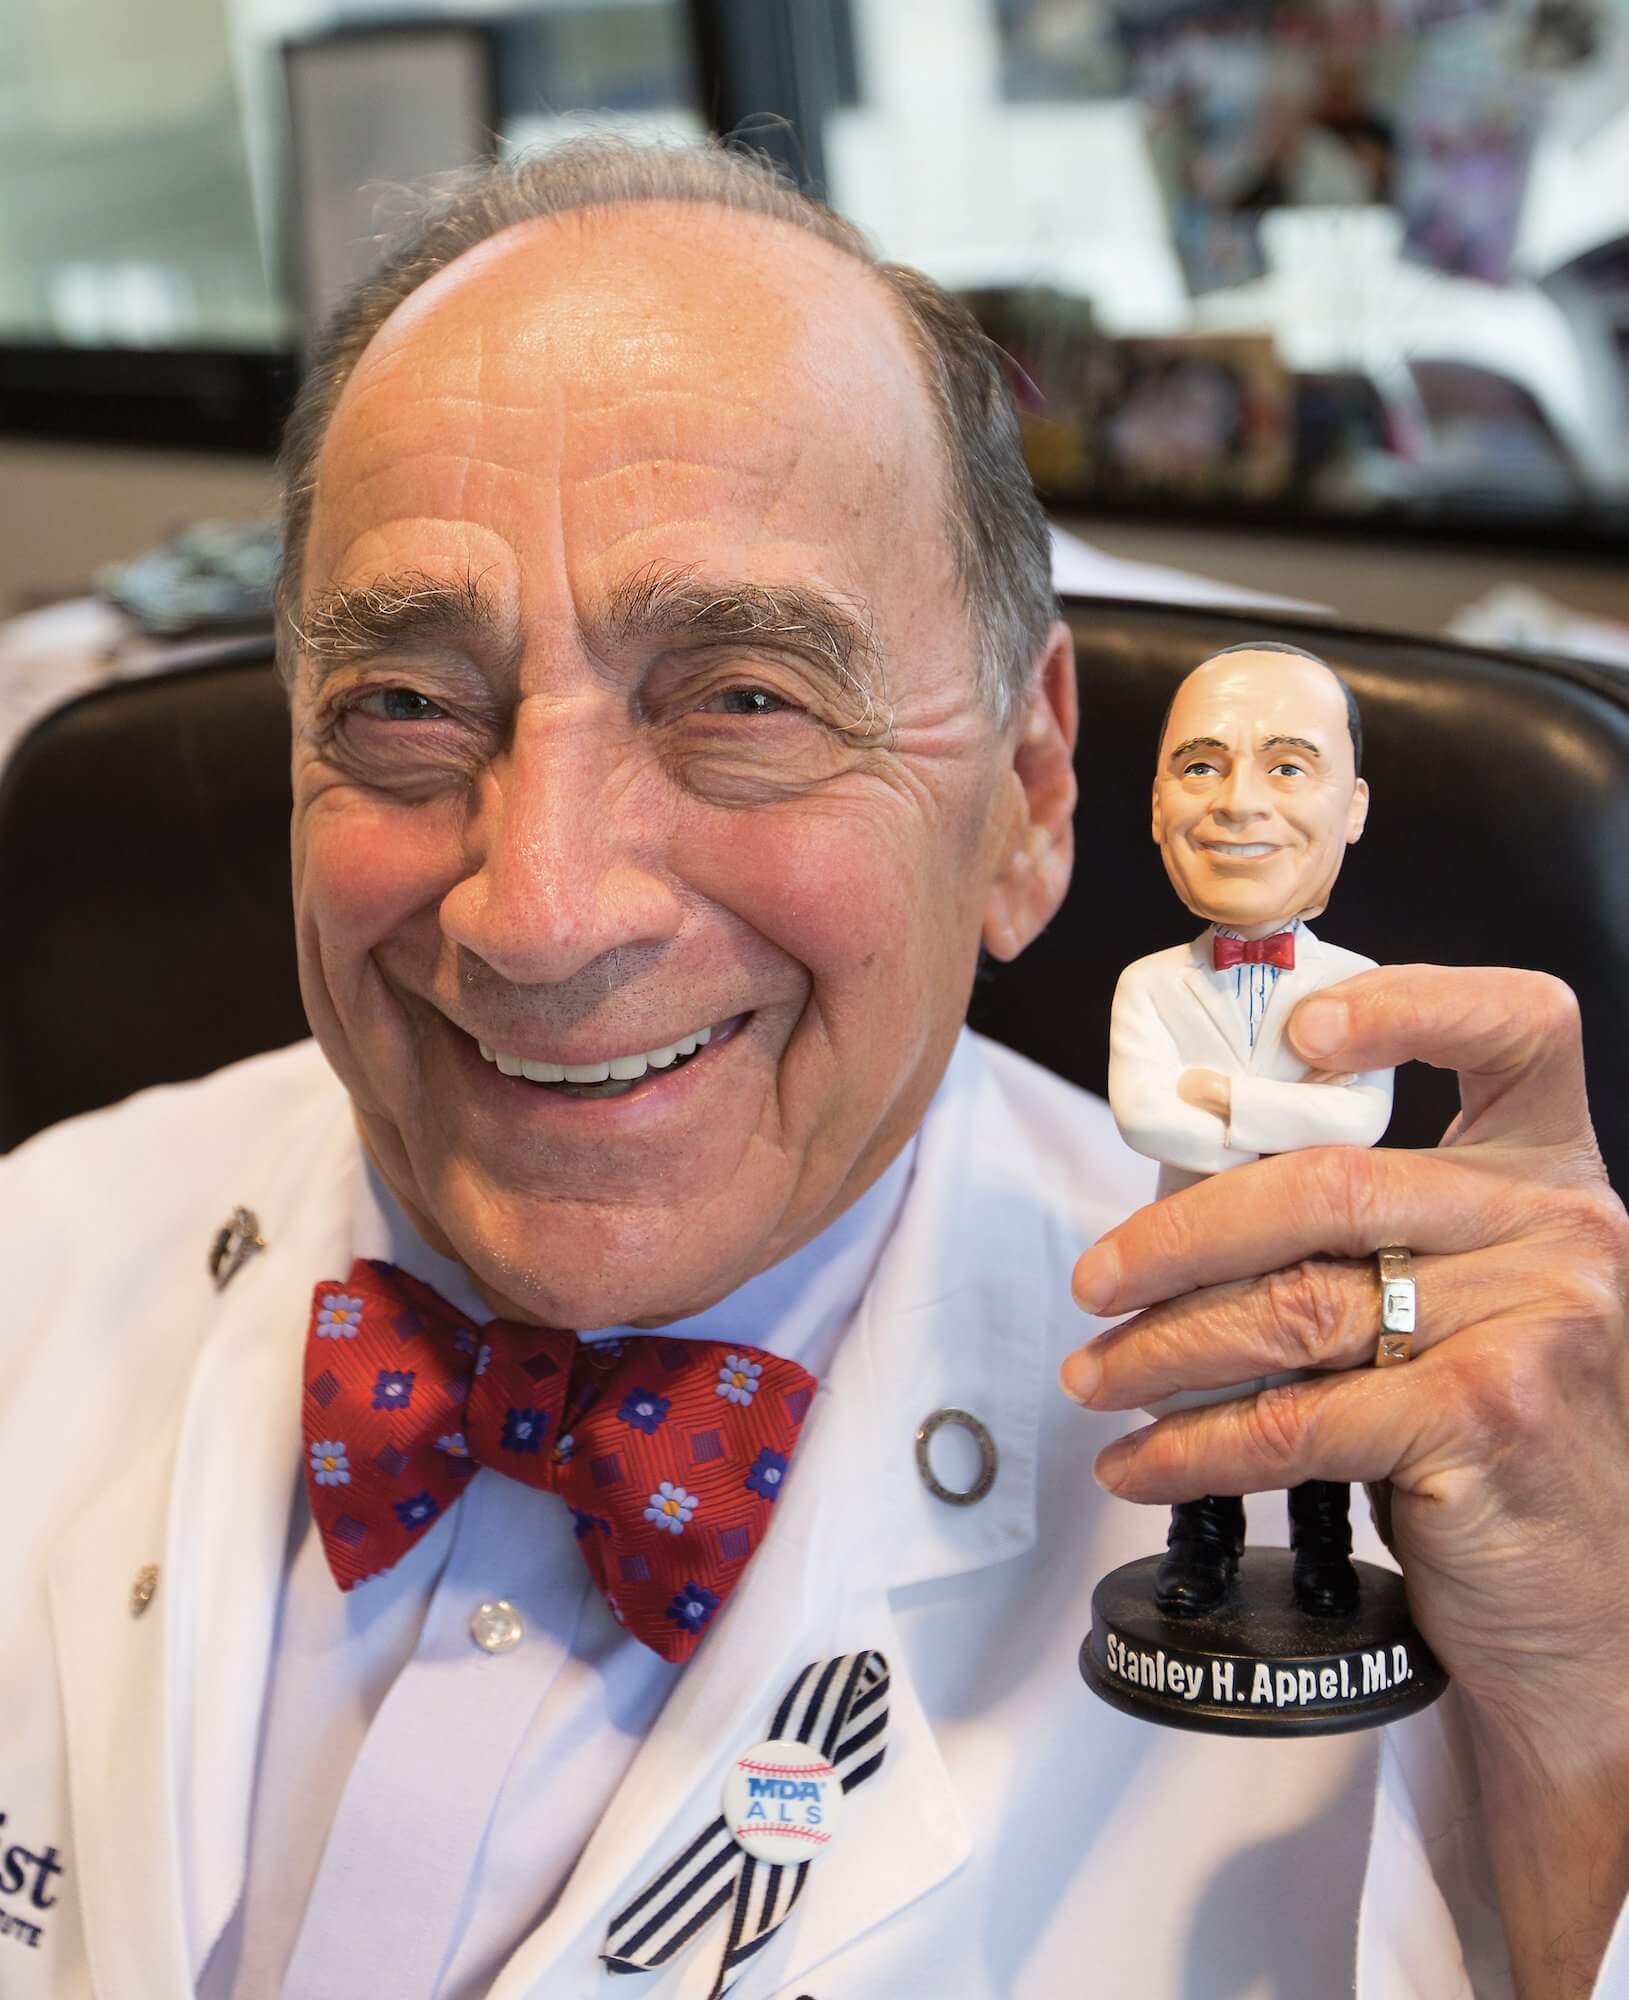 The office of Stanley Appel, M.D., is decorated with an extensive variety of awards, souvenirs and gifts, including this bobblehead, given to him by his wife and son for his 75th birthday.